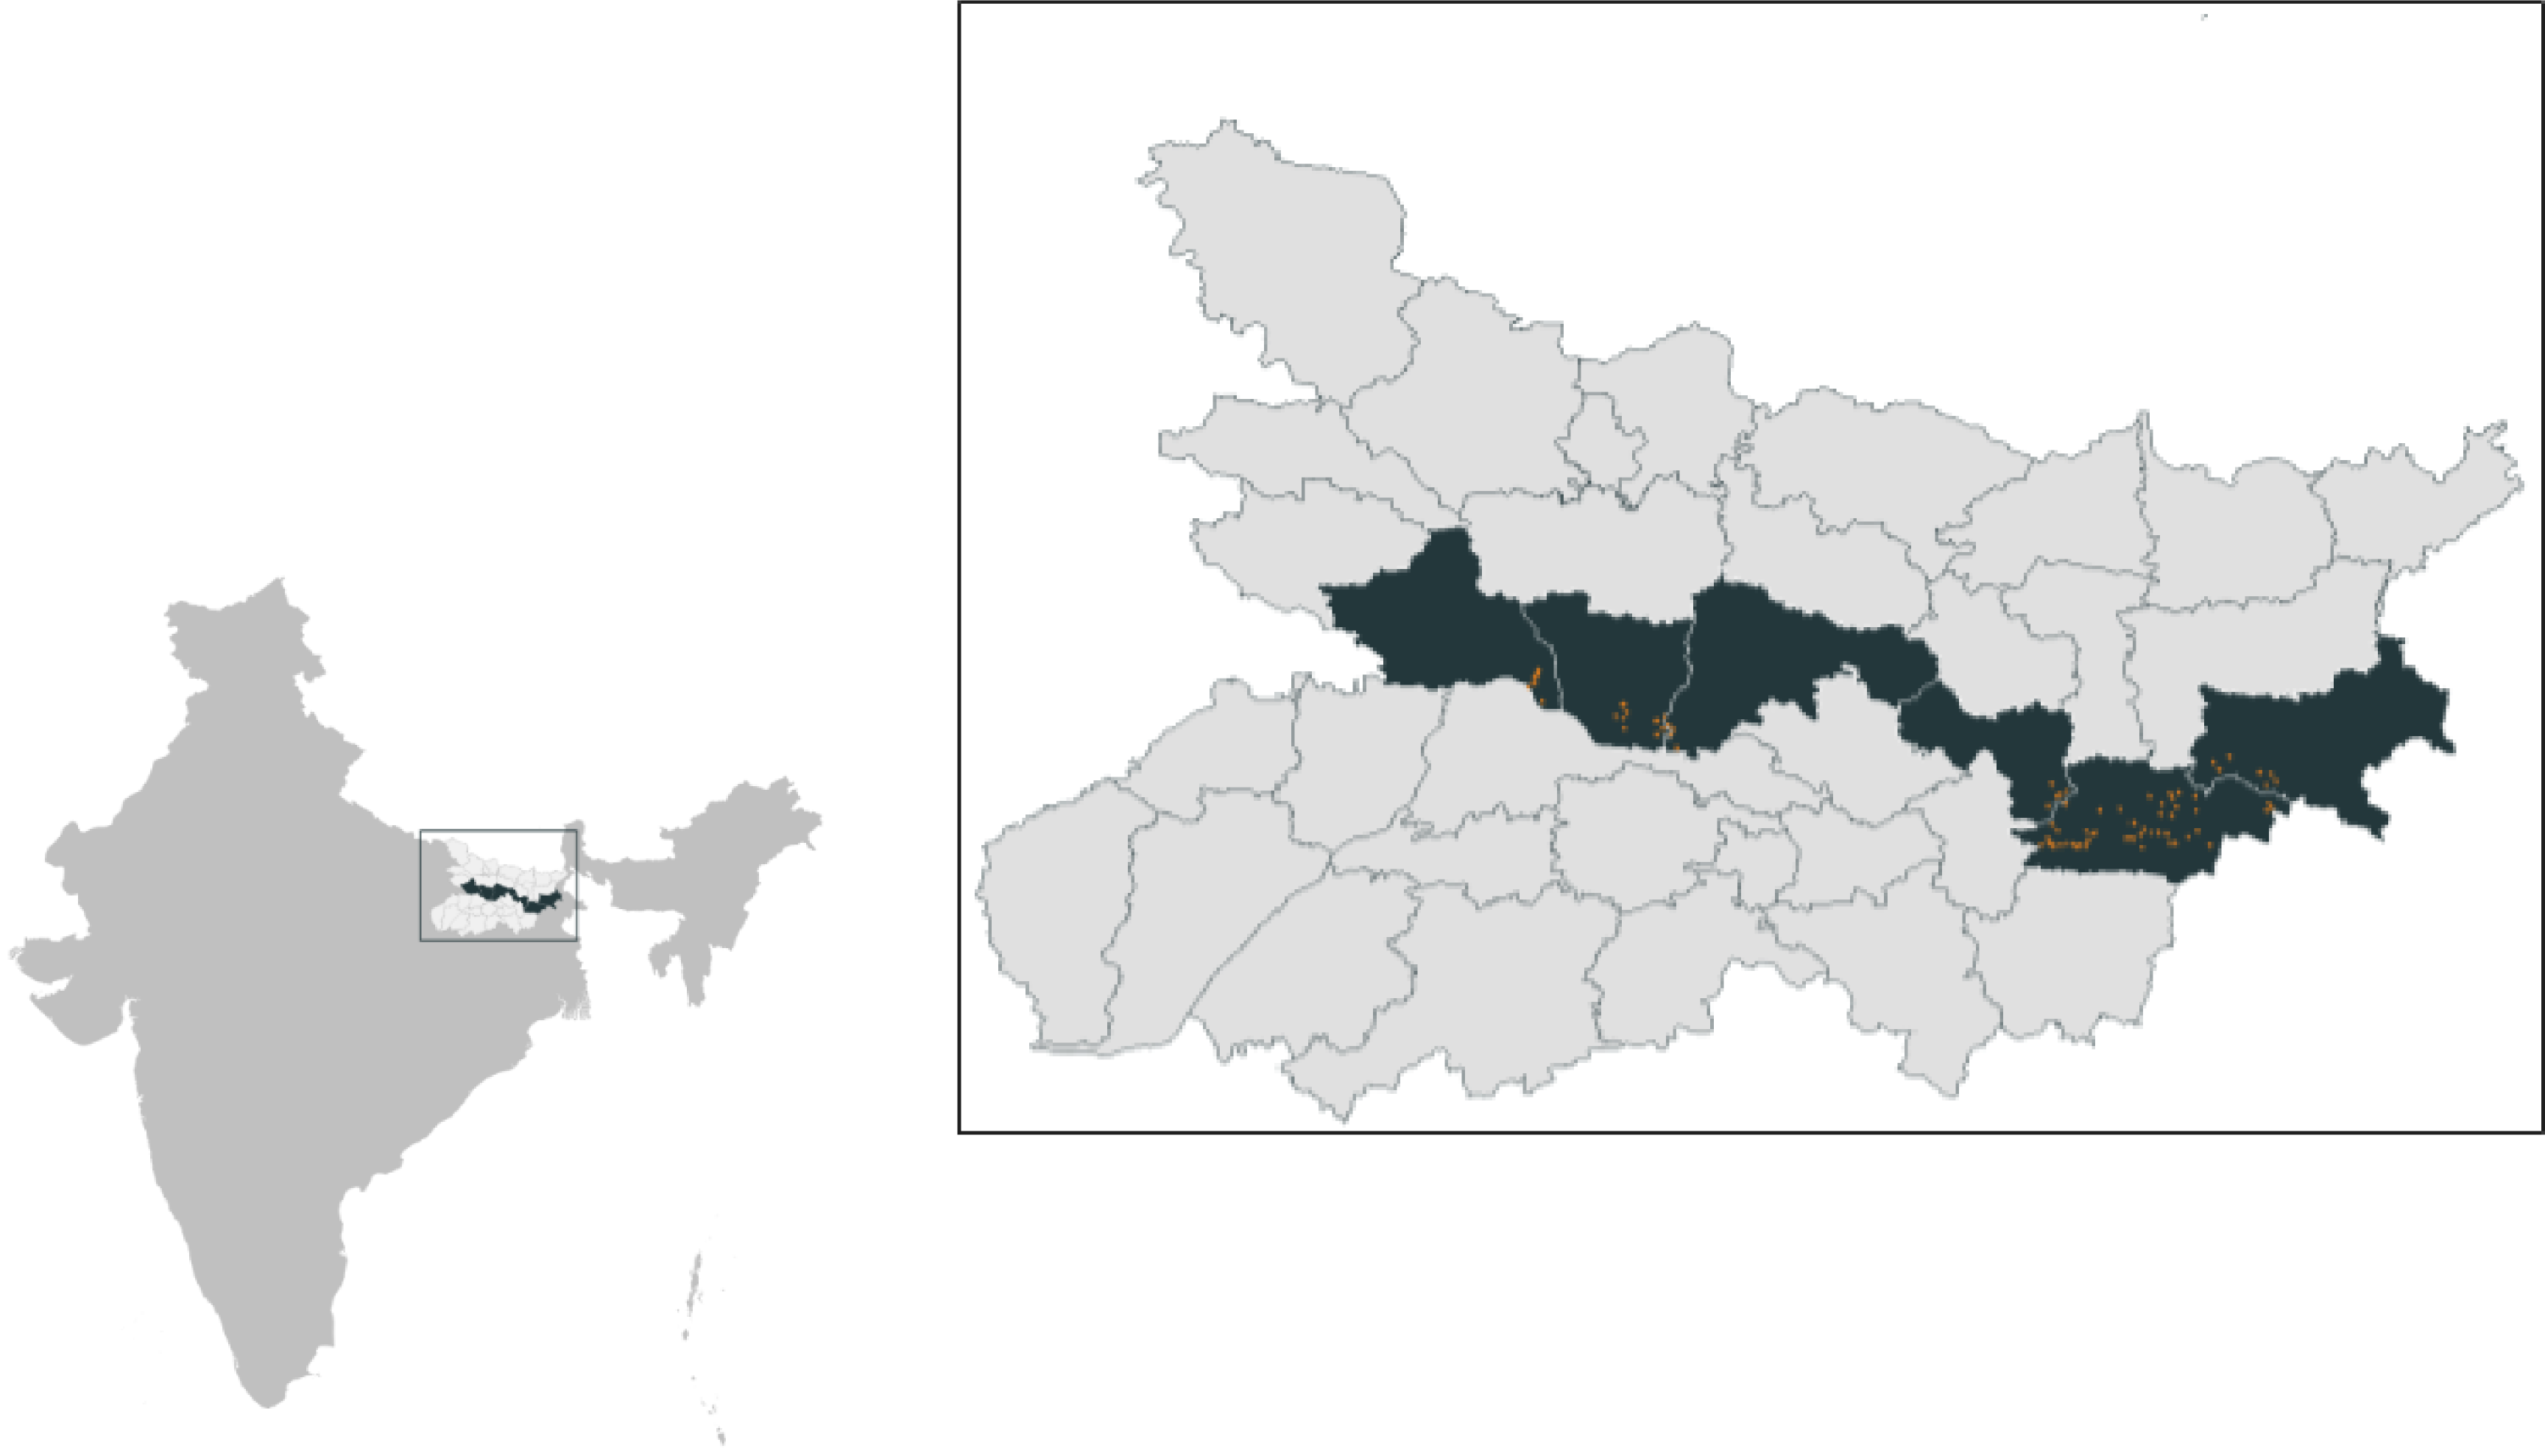 A map that shows the districts of Bihar where the survey was conducted